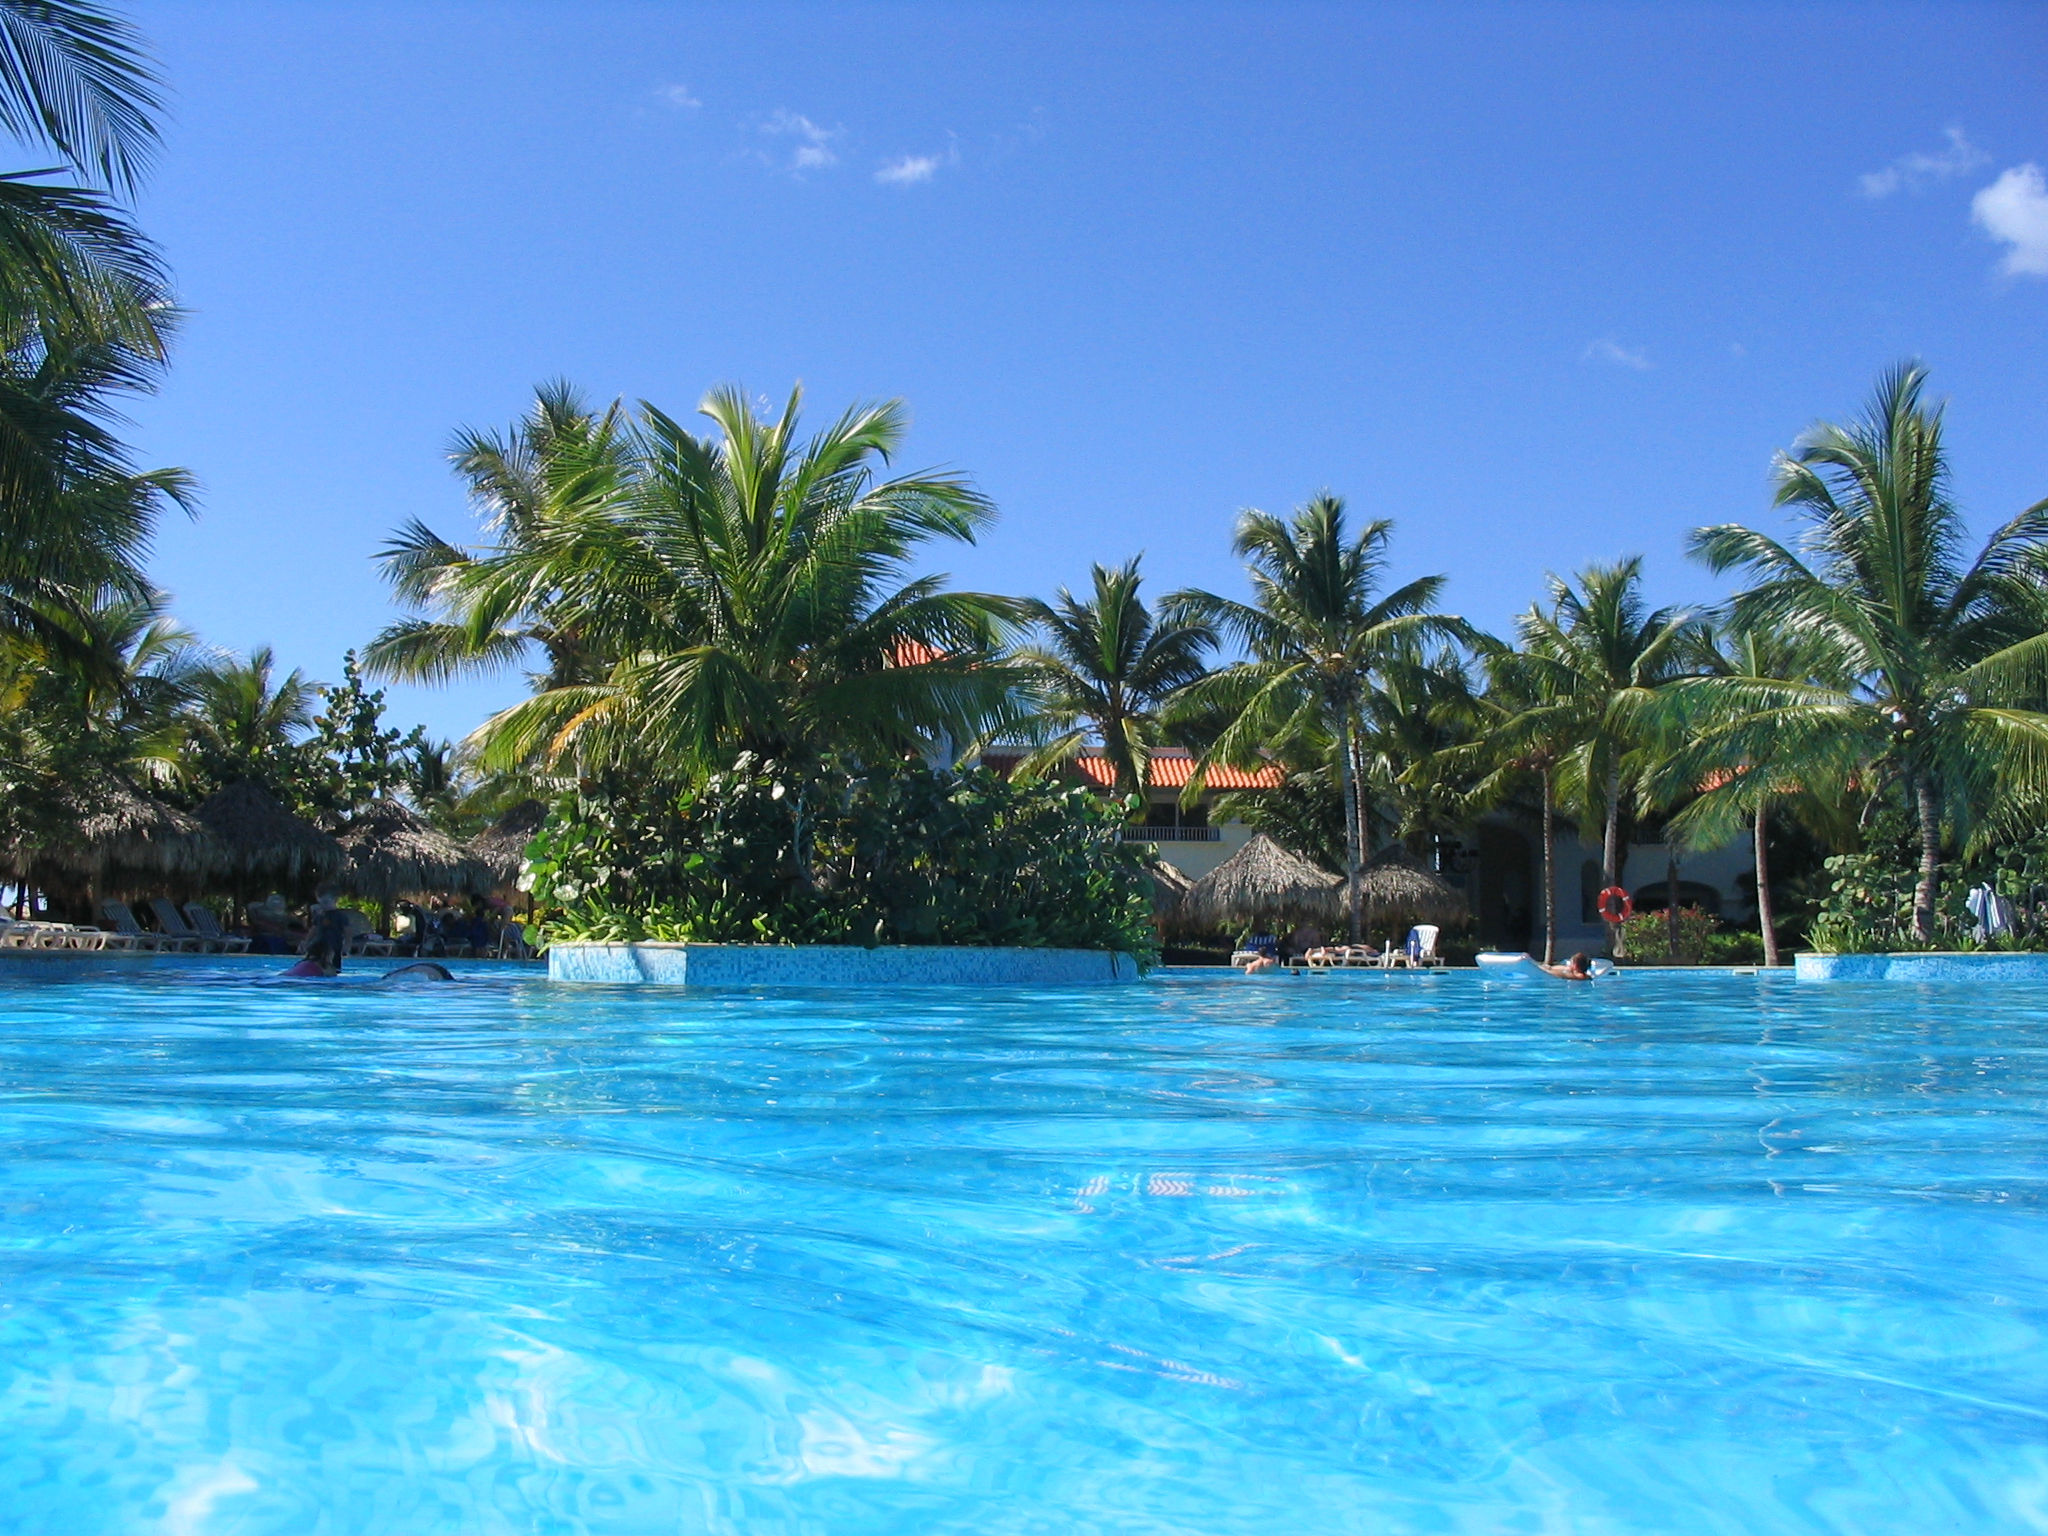 a swimming pool in a tropical area with palm trees